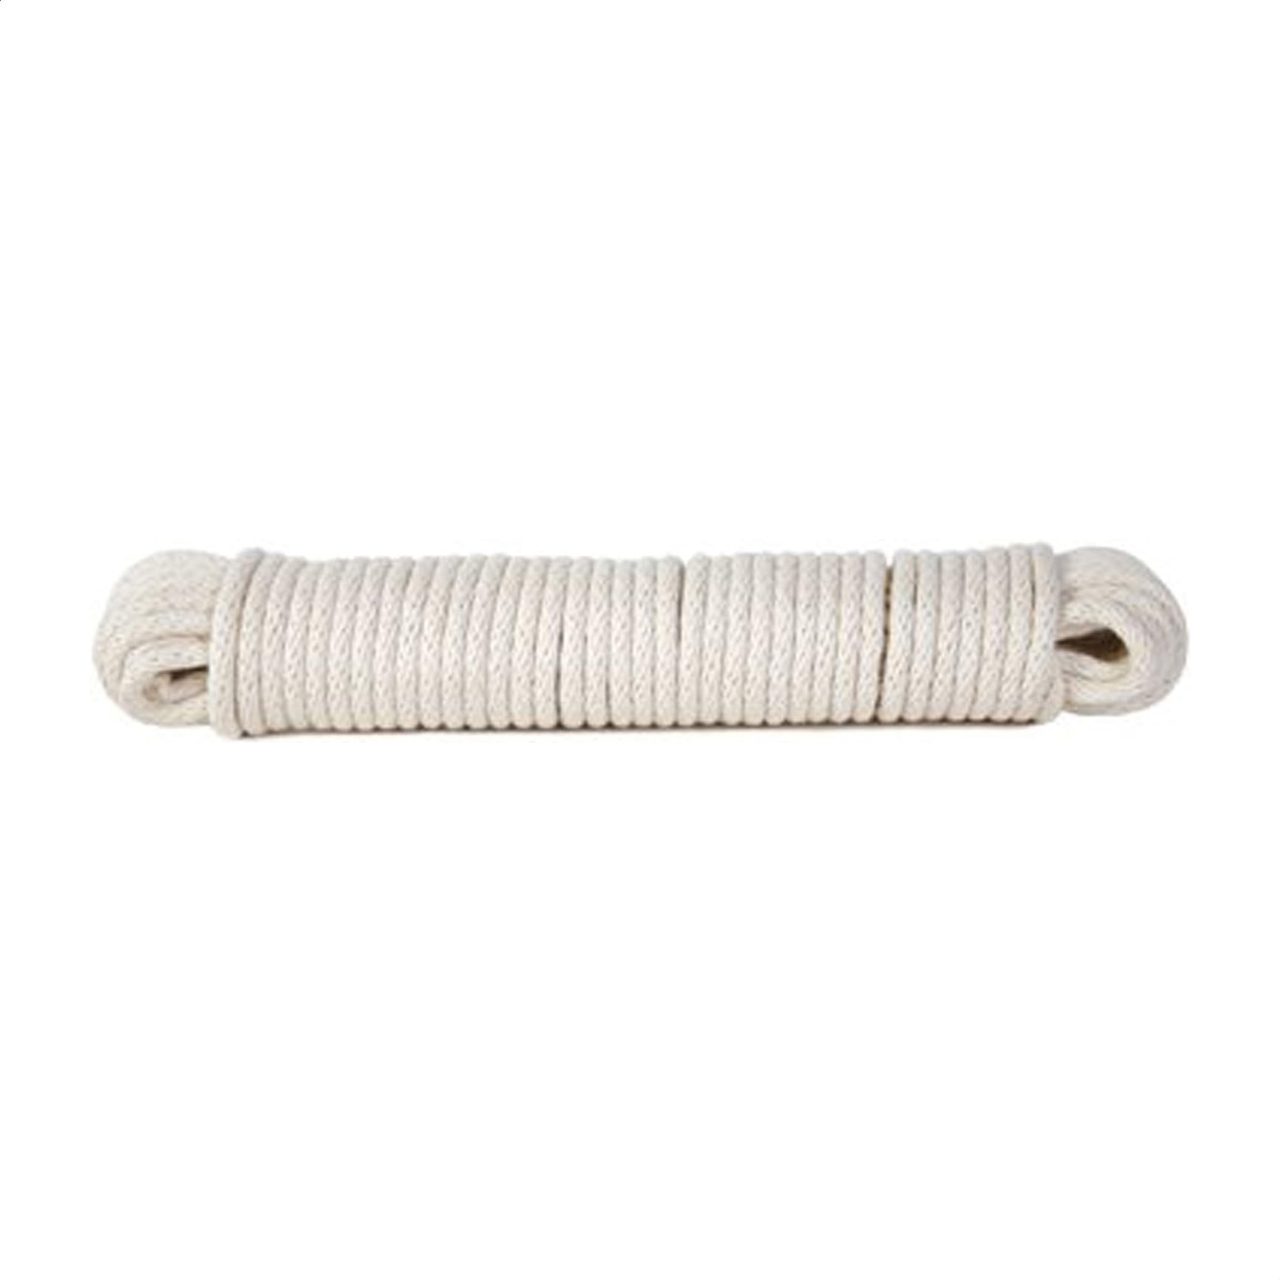 Heavy-Duty-braided-cotton rope